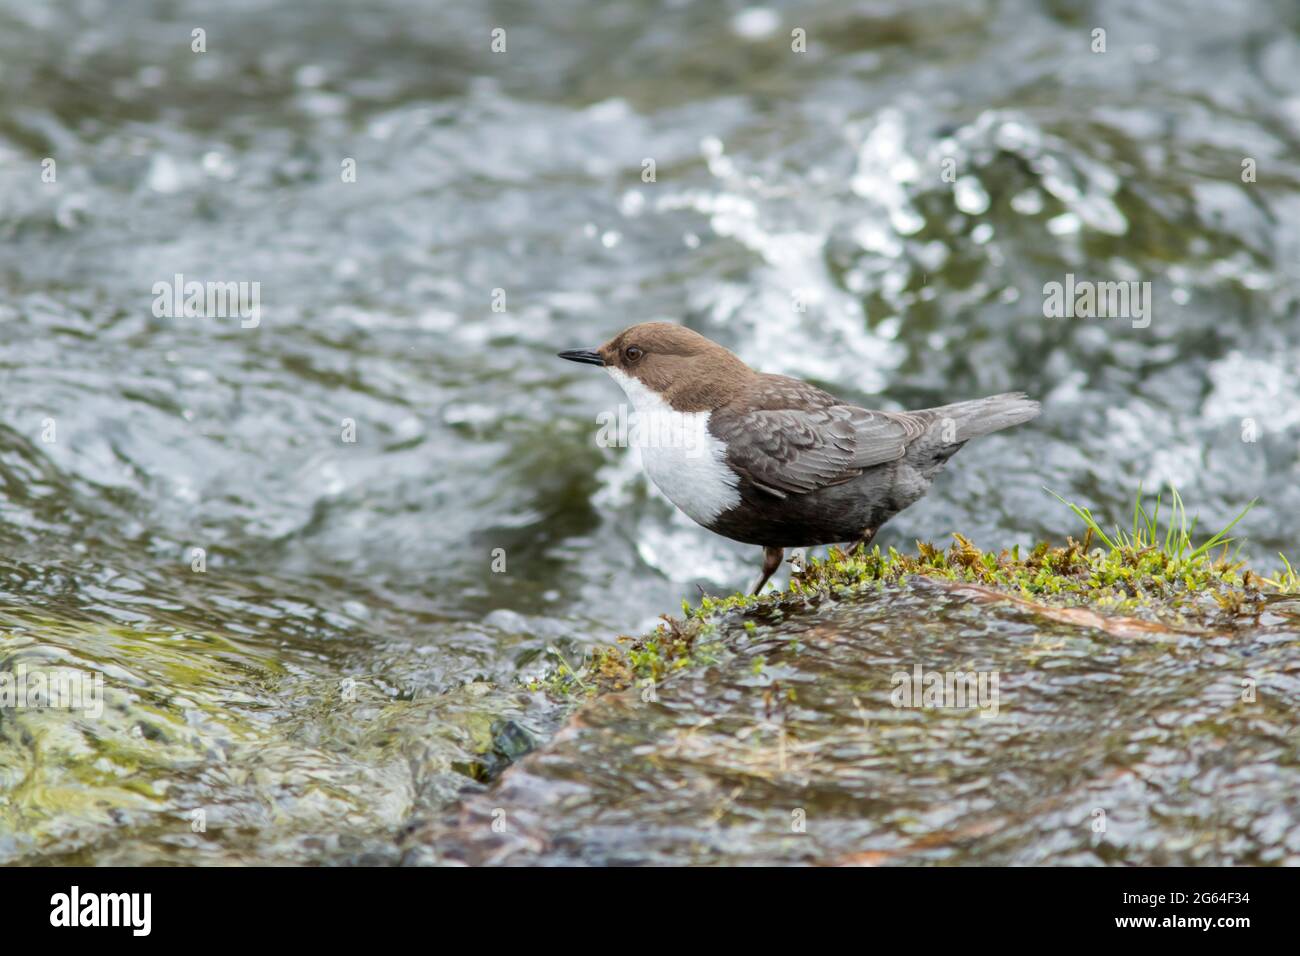 Norwegian national bird, White-throated dipper, Cinclus cinclus  standing on the rock in the river during summer in Finnish nature Stock Photo